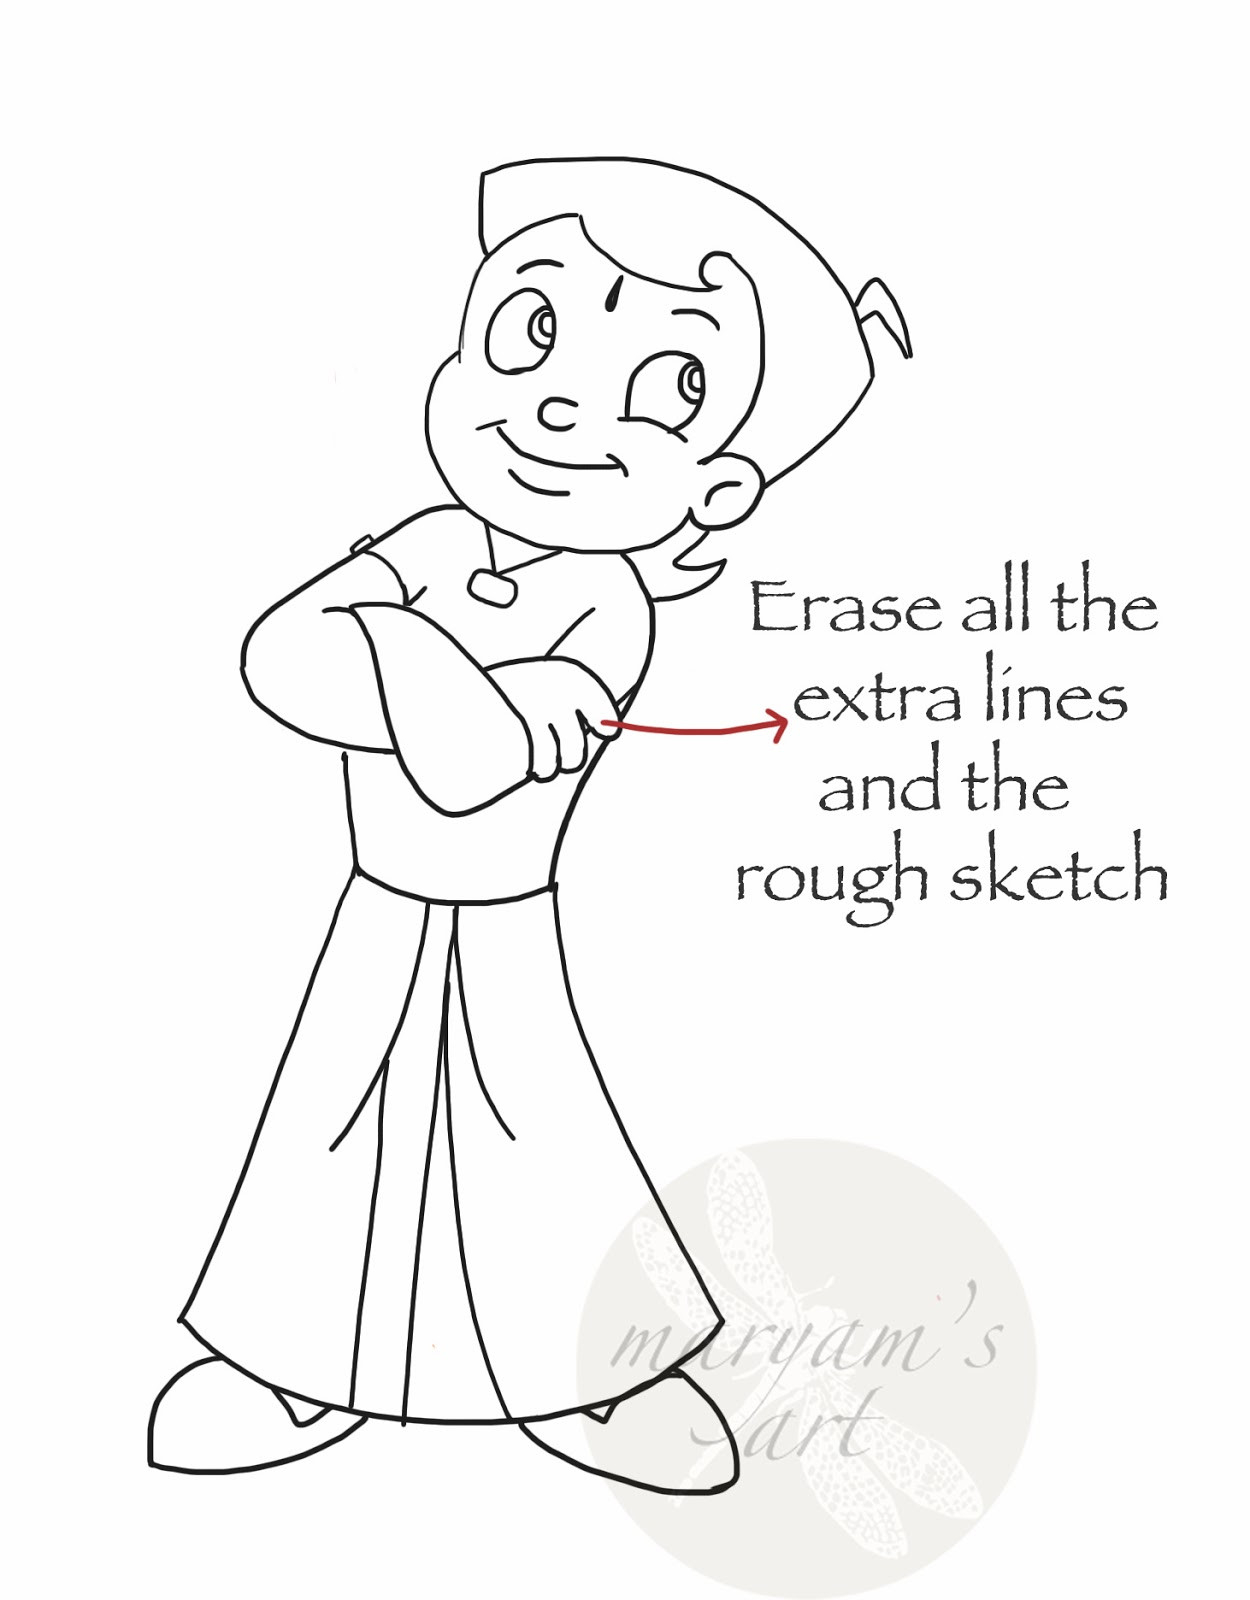 Chota Bheem Coloring Pages Chota Bheem Coloring Pages Inspirational School For Drawing At